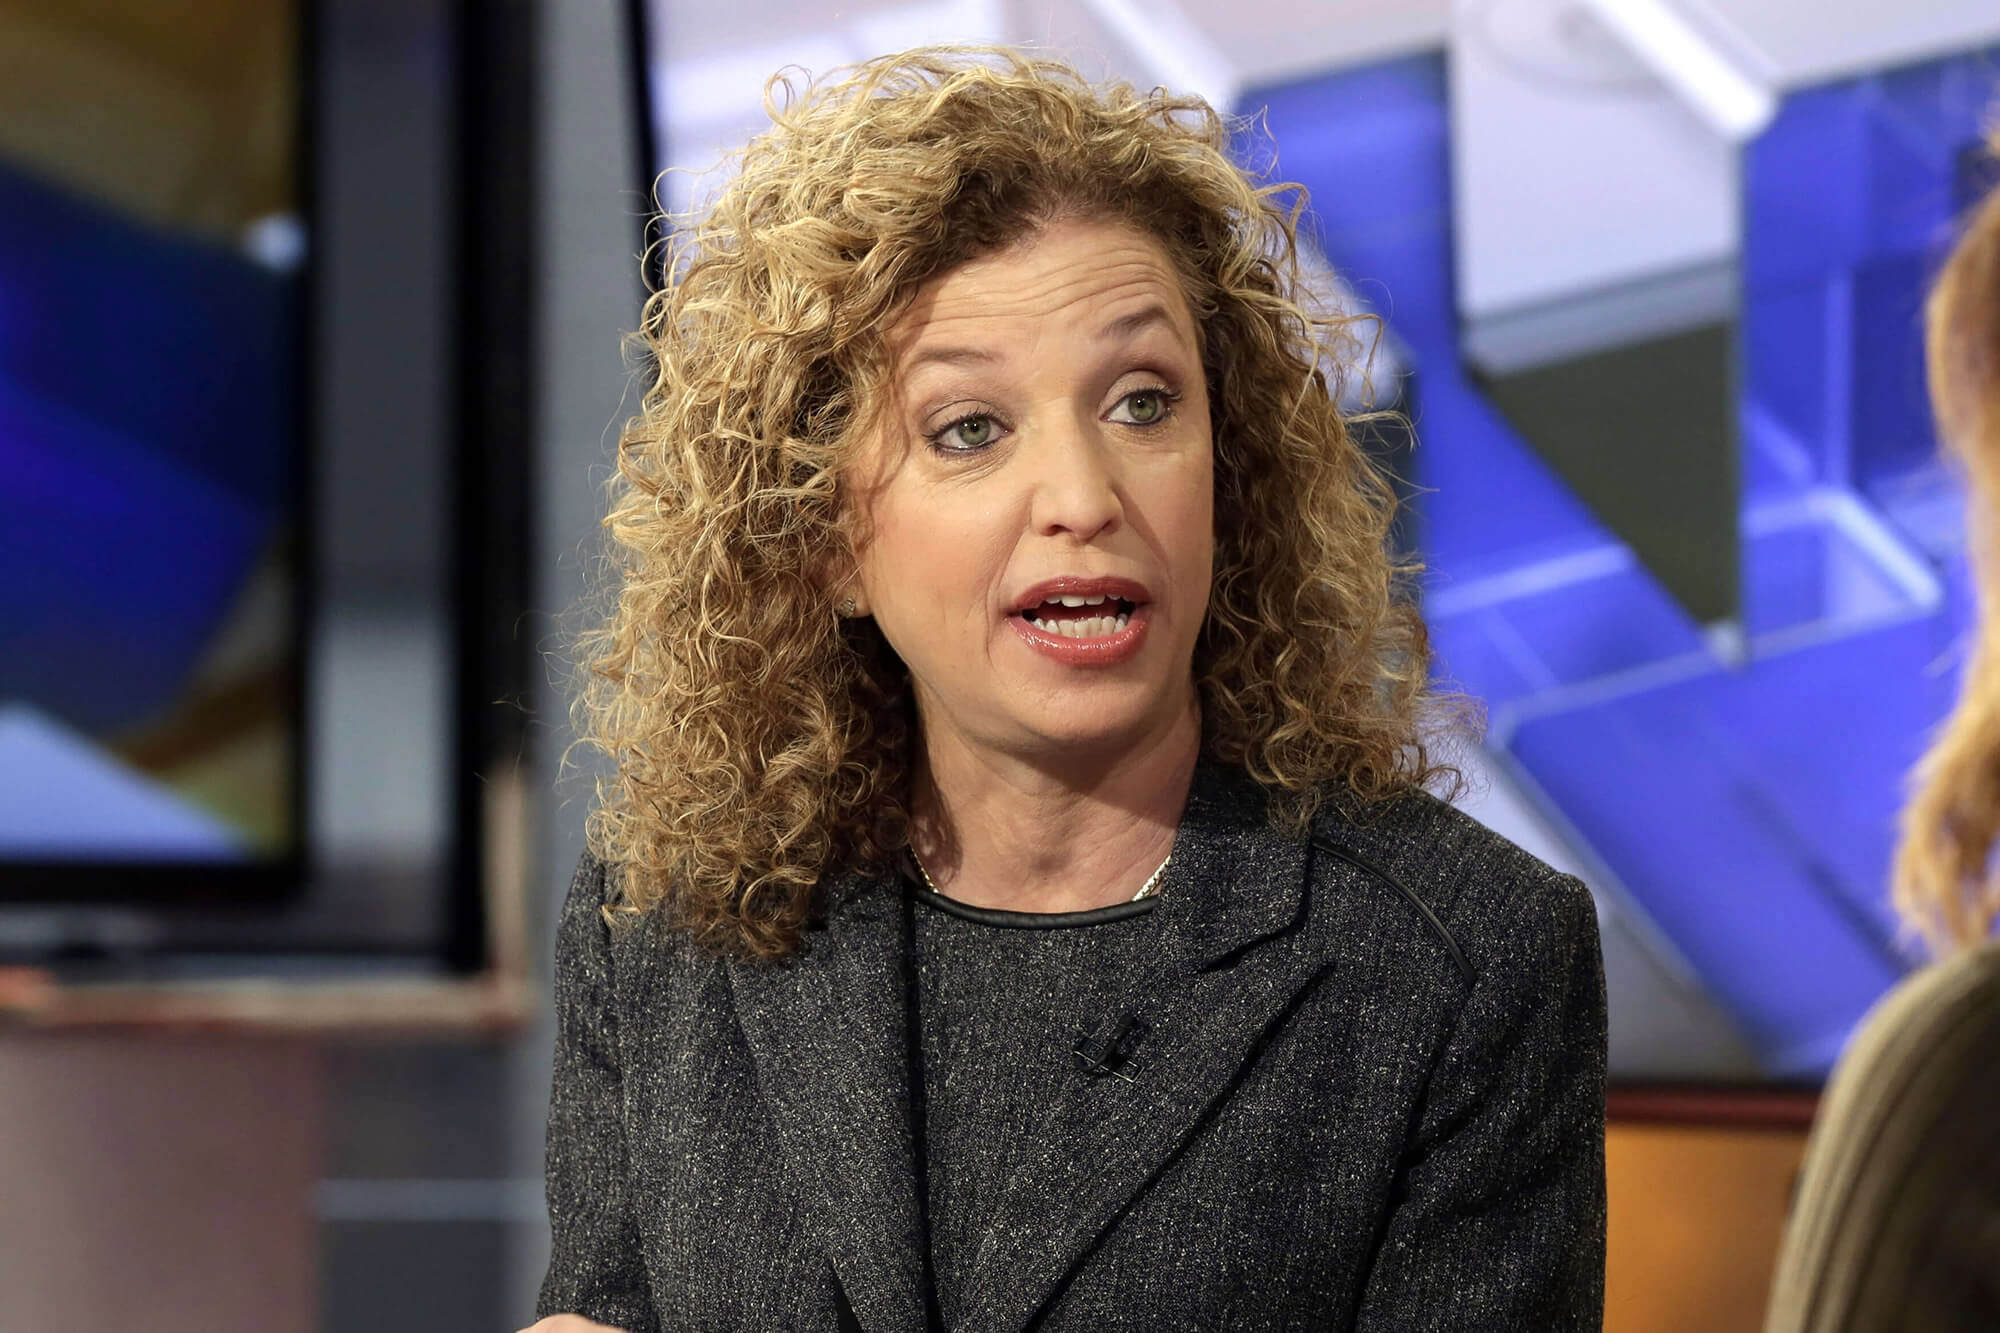 Image of the then-Democratic National Committee (DNC) Chair Rep. Debbie Wasserman Schultz being interviewed